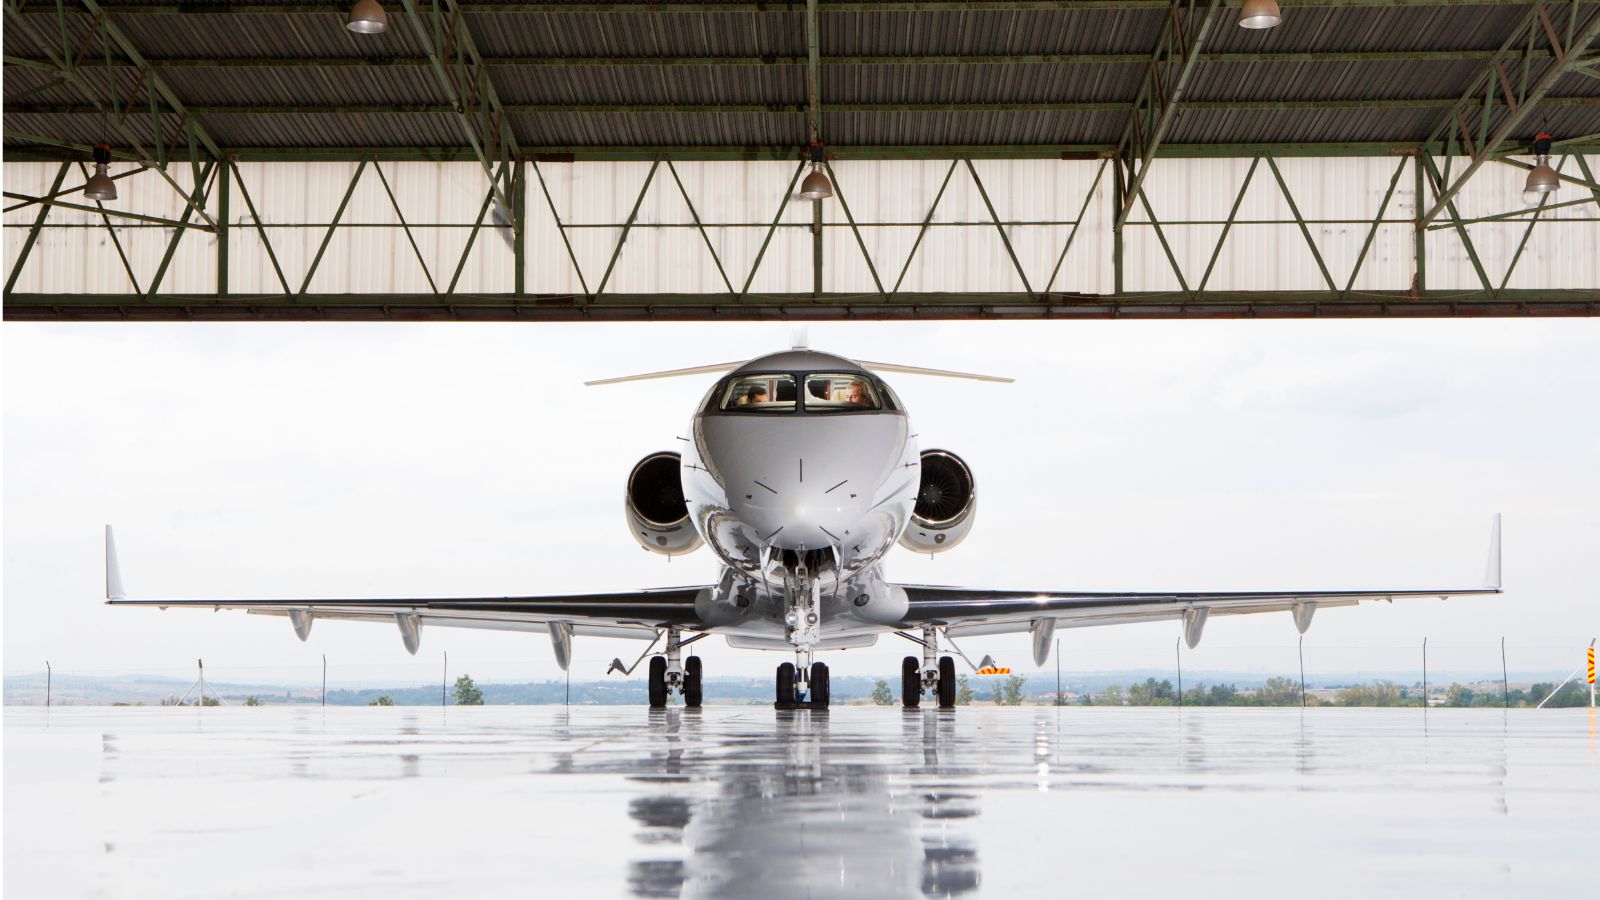 Private jet in aircraft hangar